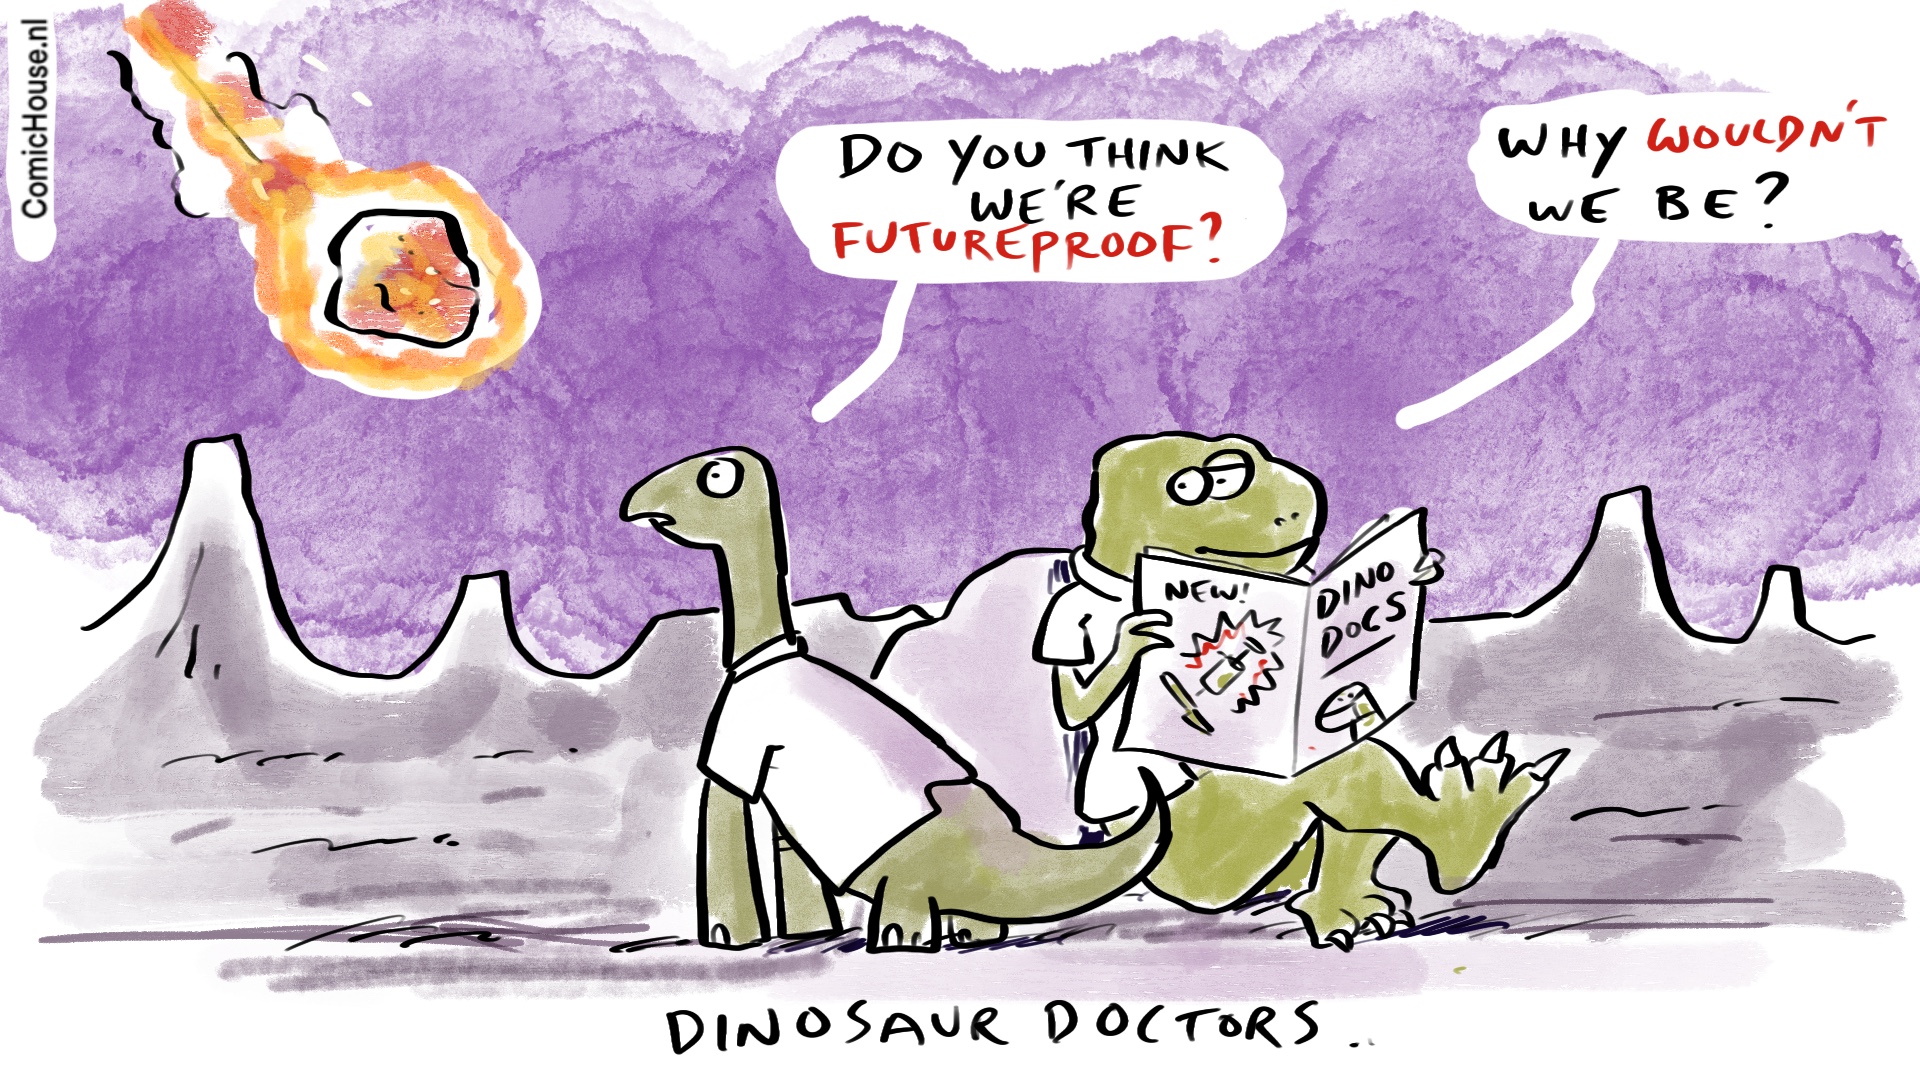 FutureProofing Healthcare - making sure healthcare is prepared for what is to come -Dinosaur doctors 